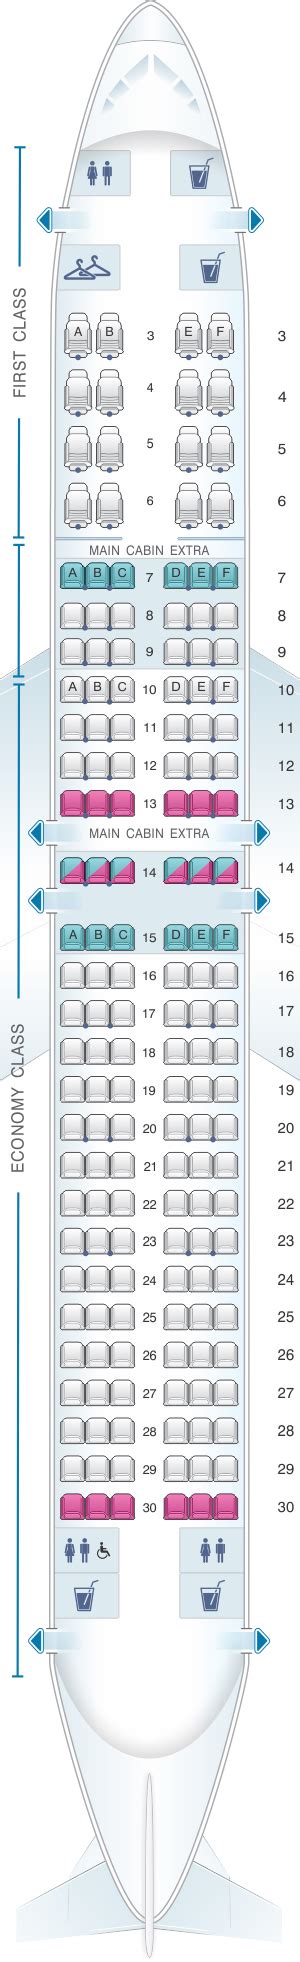 American Airlines Plane Seating Chart 738 Awesome Home